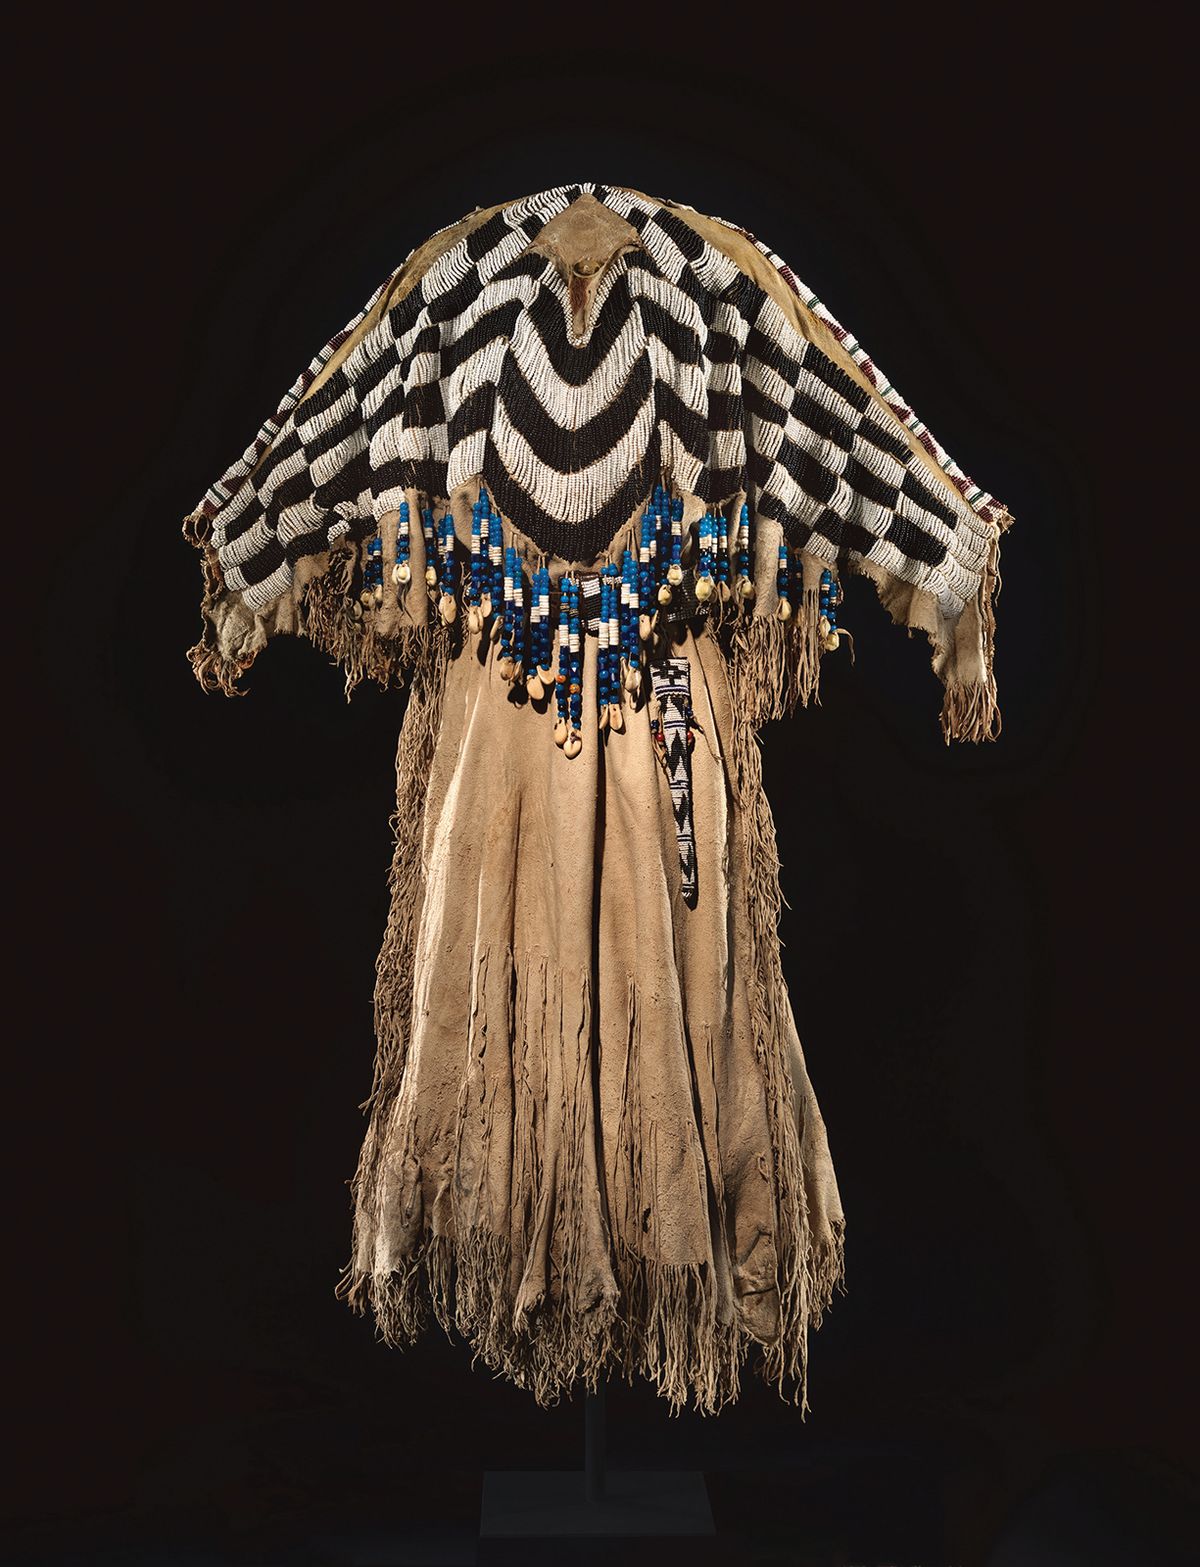 This Wasco tribe dress (around 1870) was one of Charles and Valerie Diker’s prized possessions Photo: Bruce Schwarz; © The Metropolitan Museum of Art; courtesy of the Charles and Valerie Diker Collection